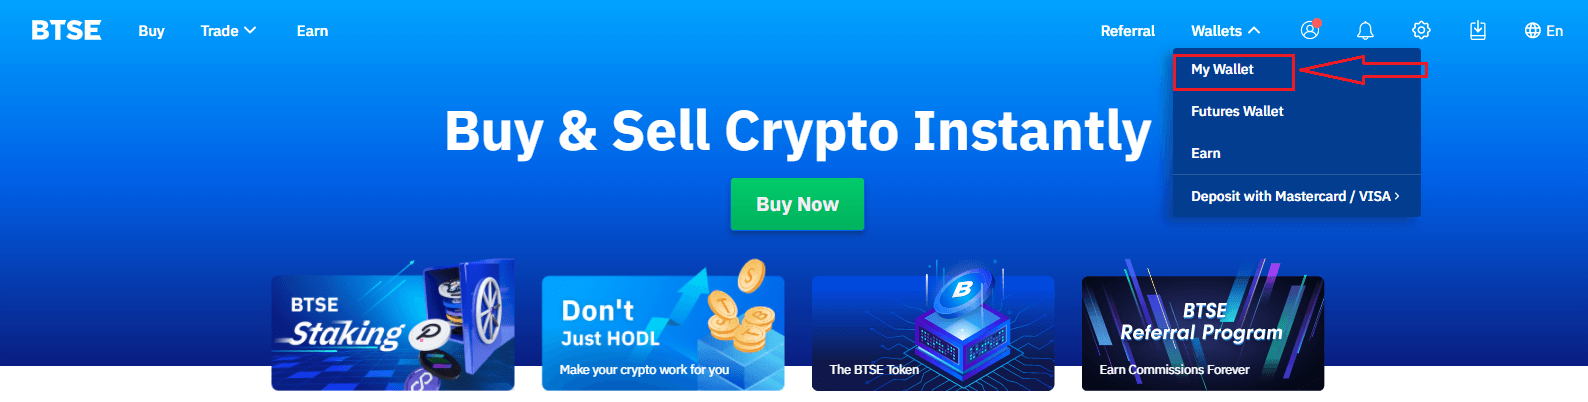 How to Start BTSE Trading in 2021: A Step-By-Step Guide for Beginners